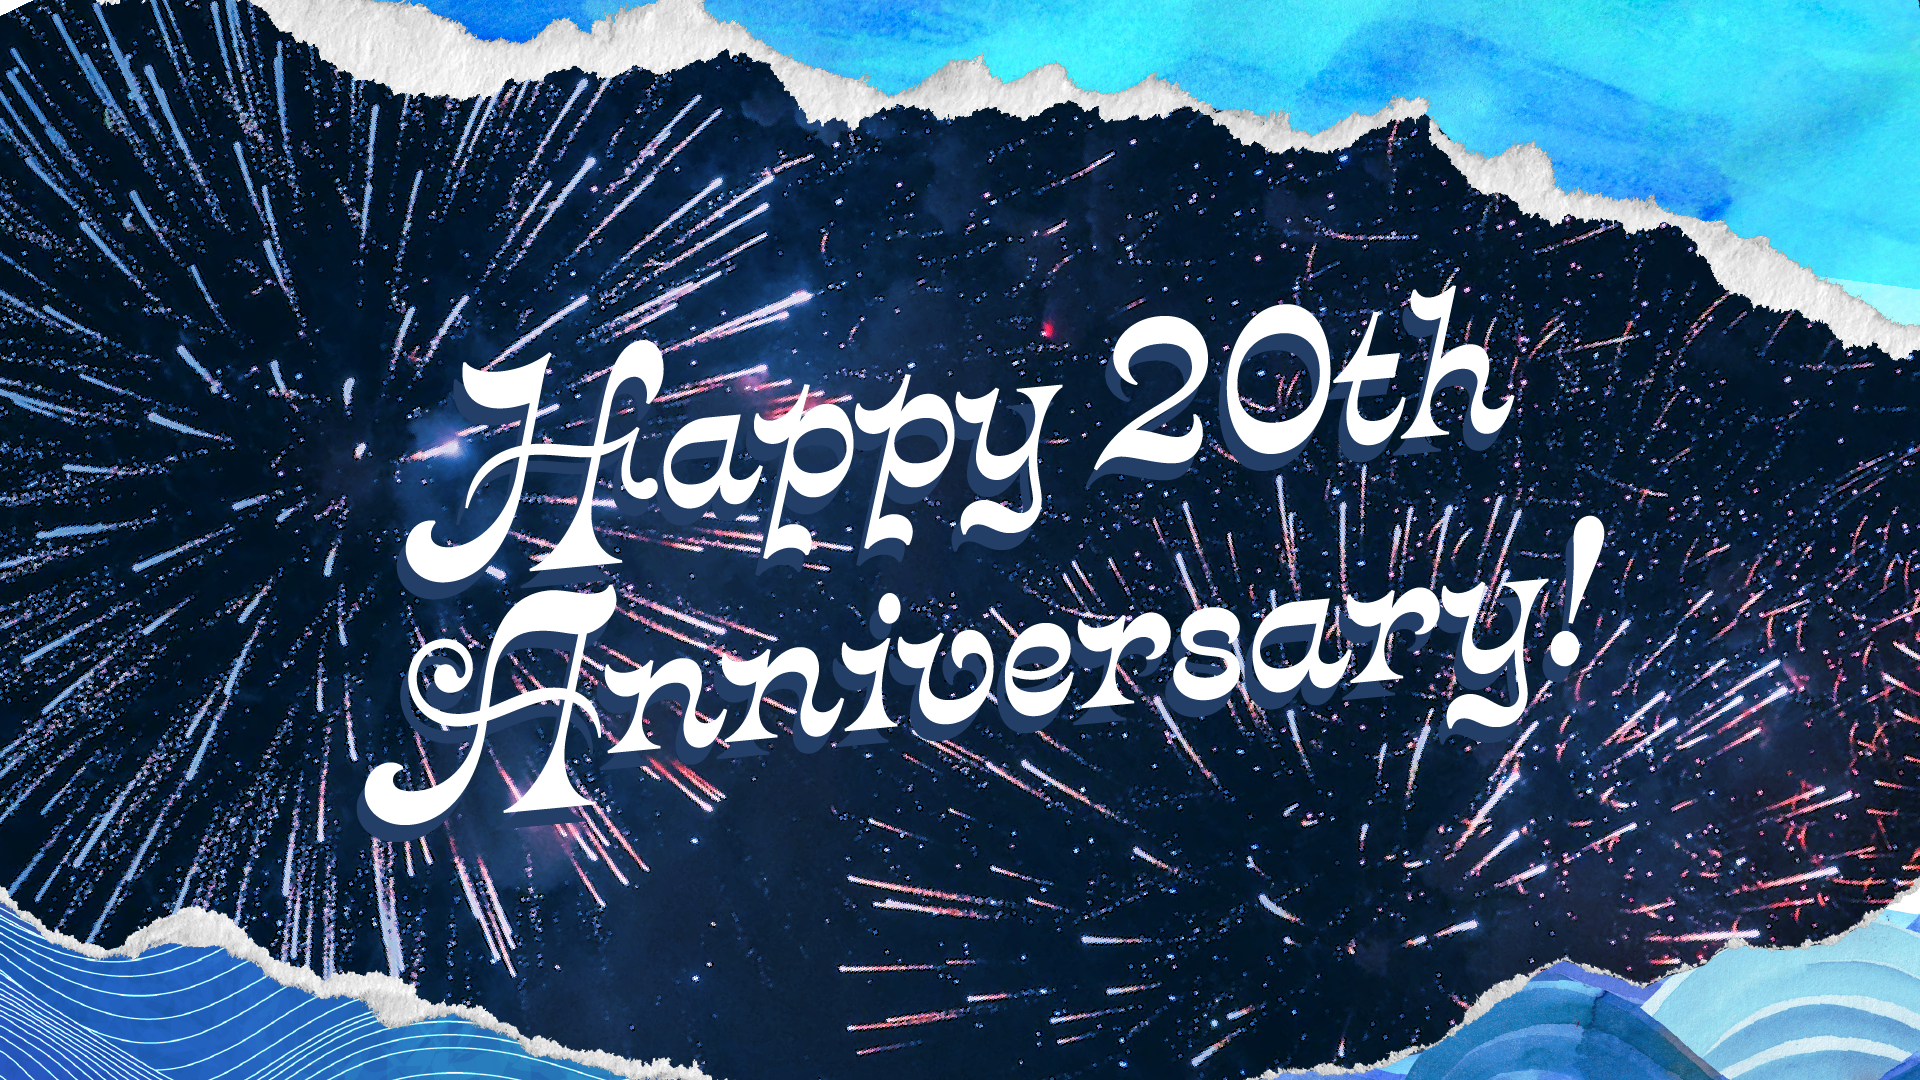 Featured image for “Happy 20th anniversary to us!”